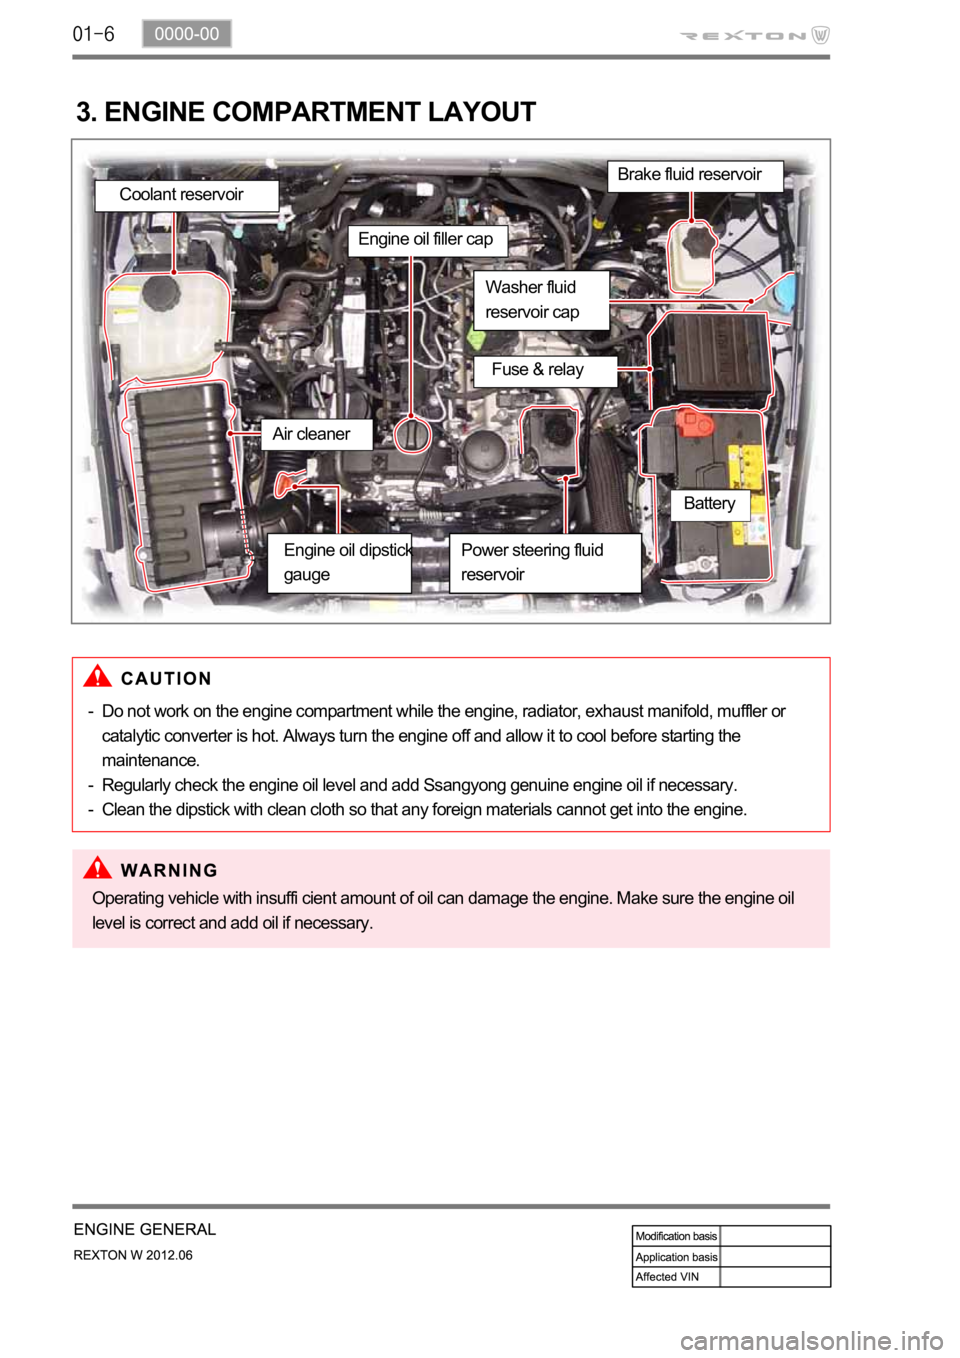 SSANGYONG NEW REXTON 2012  Service Manual 3. ENGINE COMPARTMENT LAYOUT
Do not work on the engine compartment while the engine, radiator, exhaust manifold, muffler or 
catalytic converter is hot. Always turn the engine off and allow it to cool